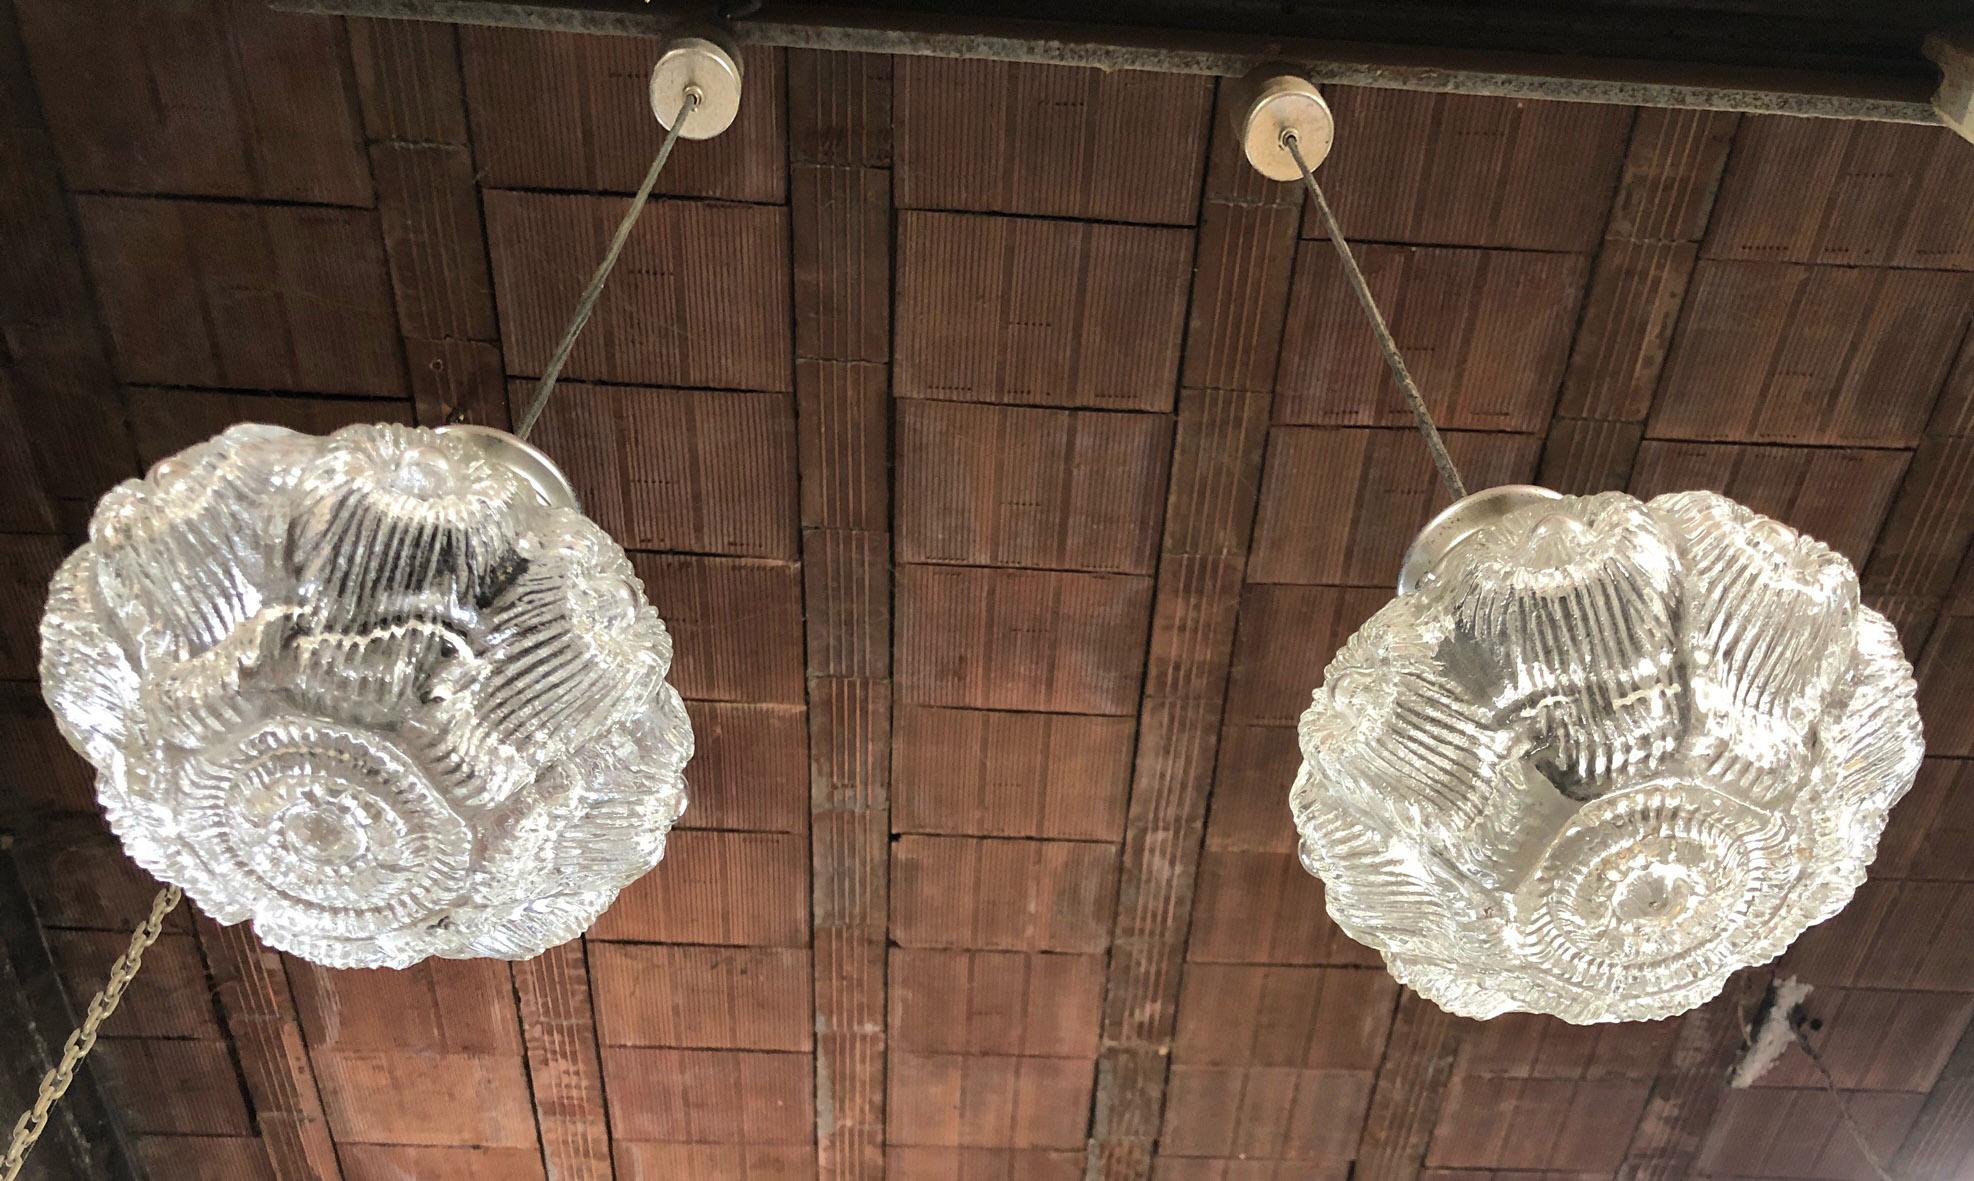 Pair of Original 1960s Italian Chandeliers with Floral-Shaped Glass and Chromed For Sale 3